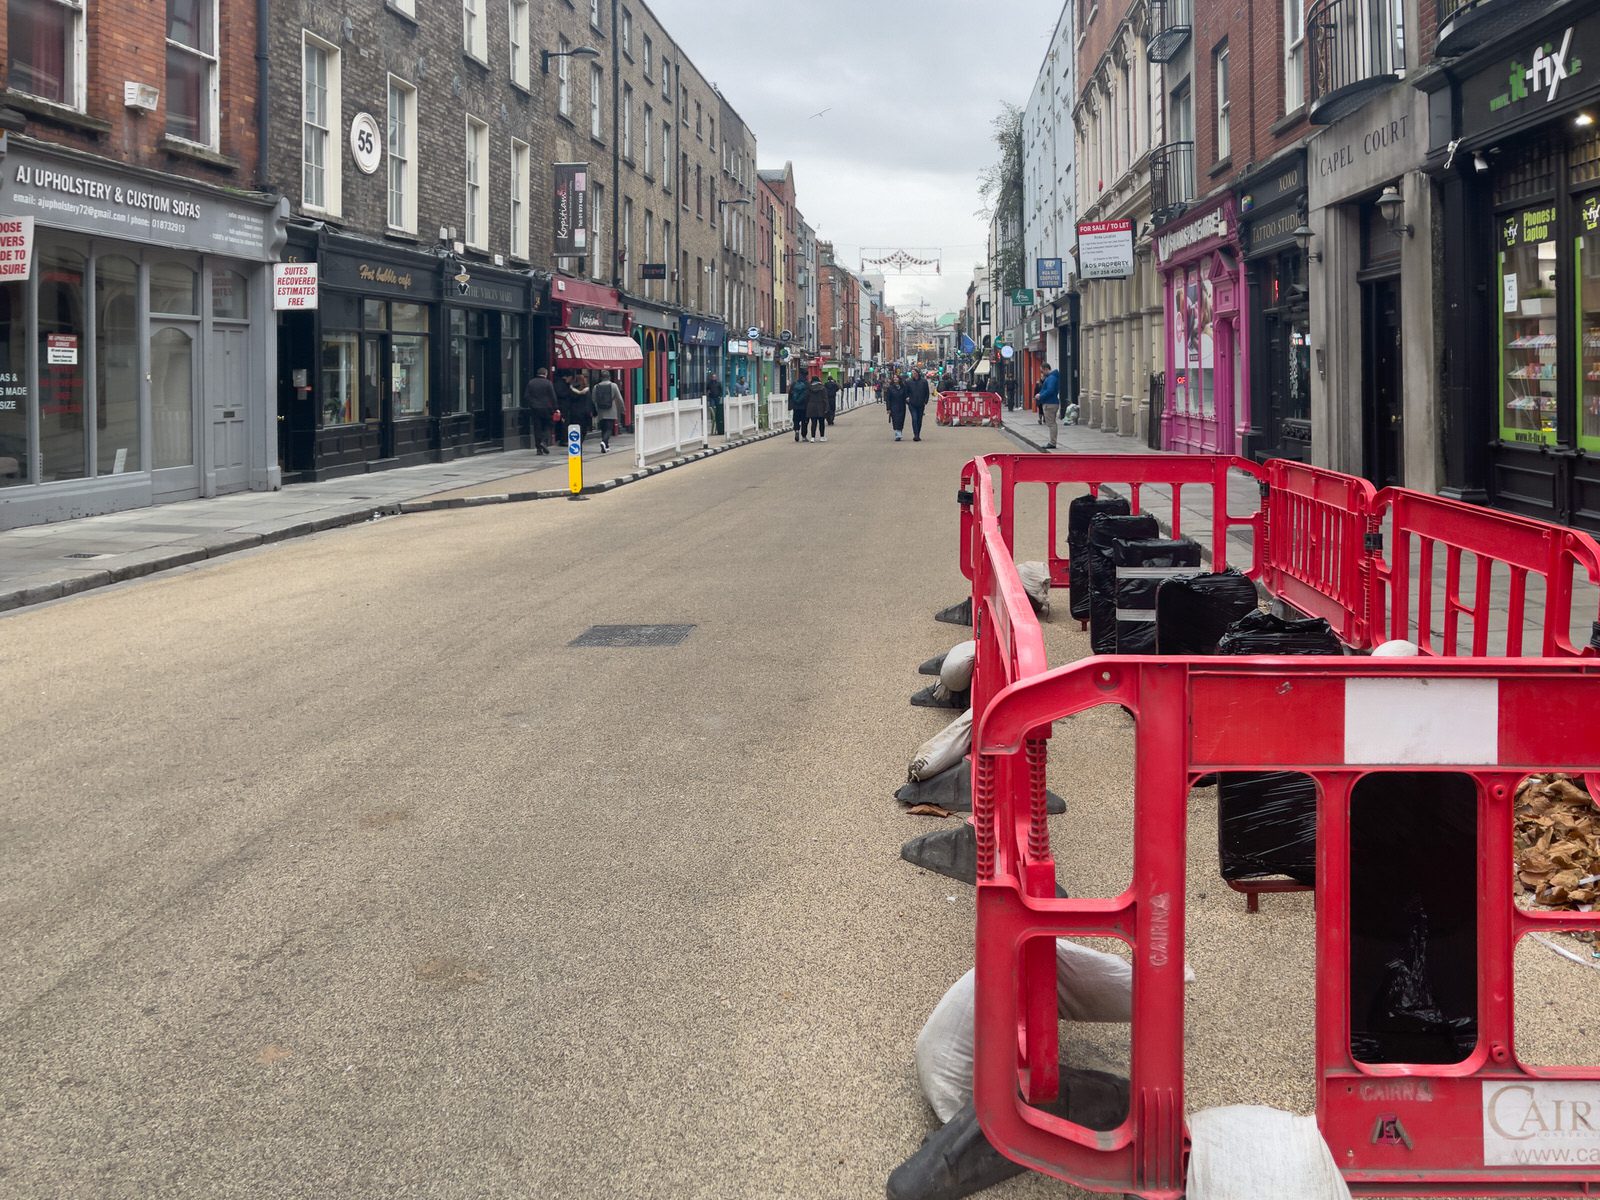 THE NEW STREET FURNITURE IS BEING INSTALLED ON CAPEL STREET [BUT THERE ARE FEW VISITORS TO BE SEEN TODAY]-225423-1